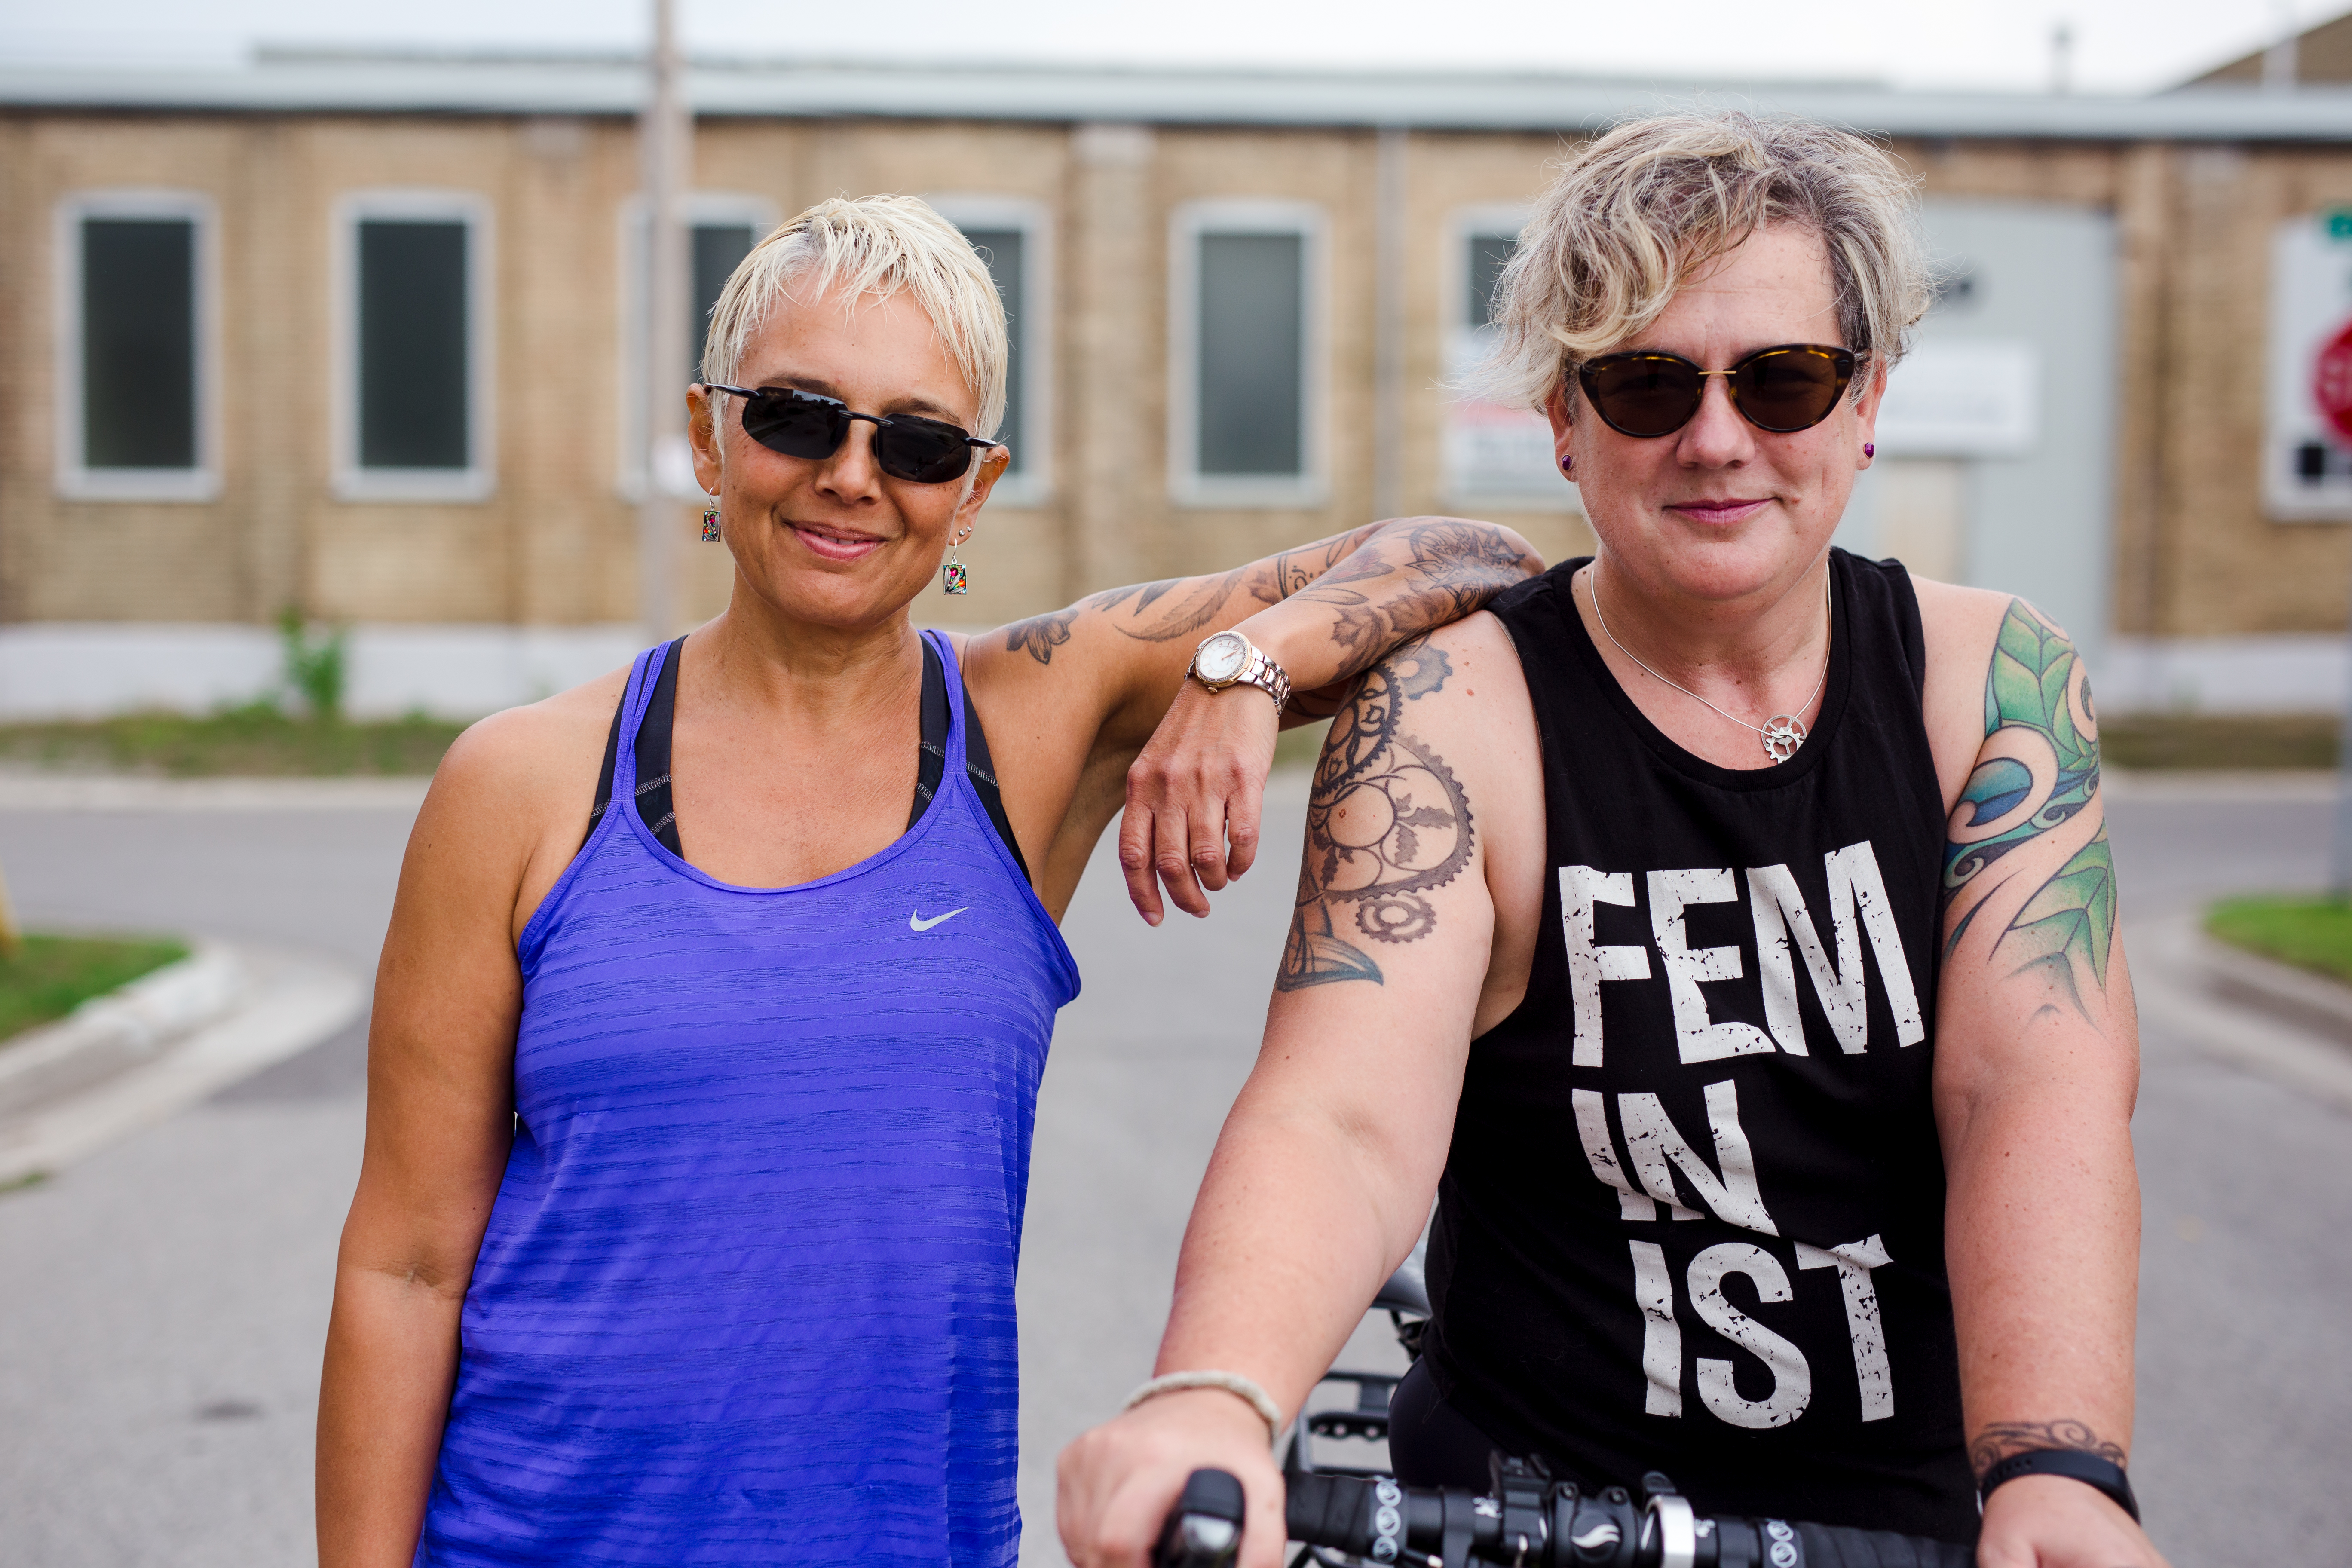 Image description: Street shot of Tracy (left) and Sam (right) from the waist up. Tracy is in a running tank, leaning on Sam's shoulder with her left elbow; Sam in on her bike, wearing a tank that says FEMINIST. Both are smiling, wearing sunglasses, street and building in background.